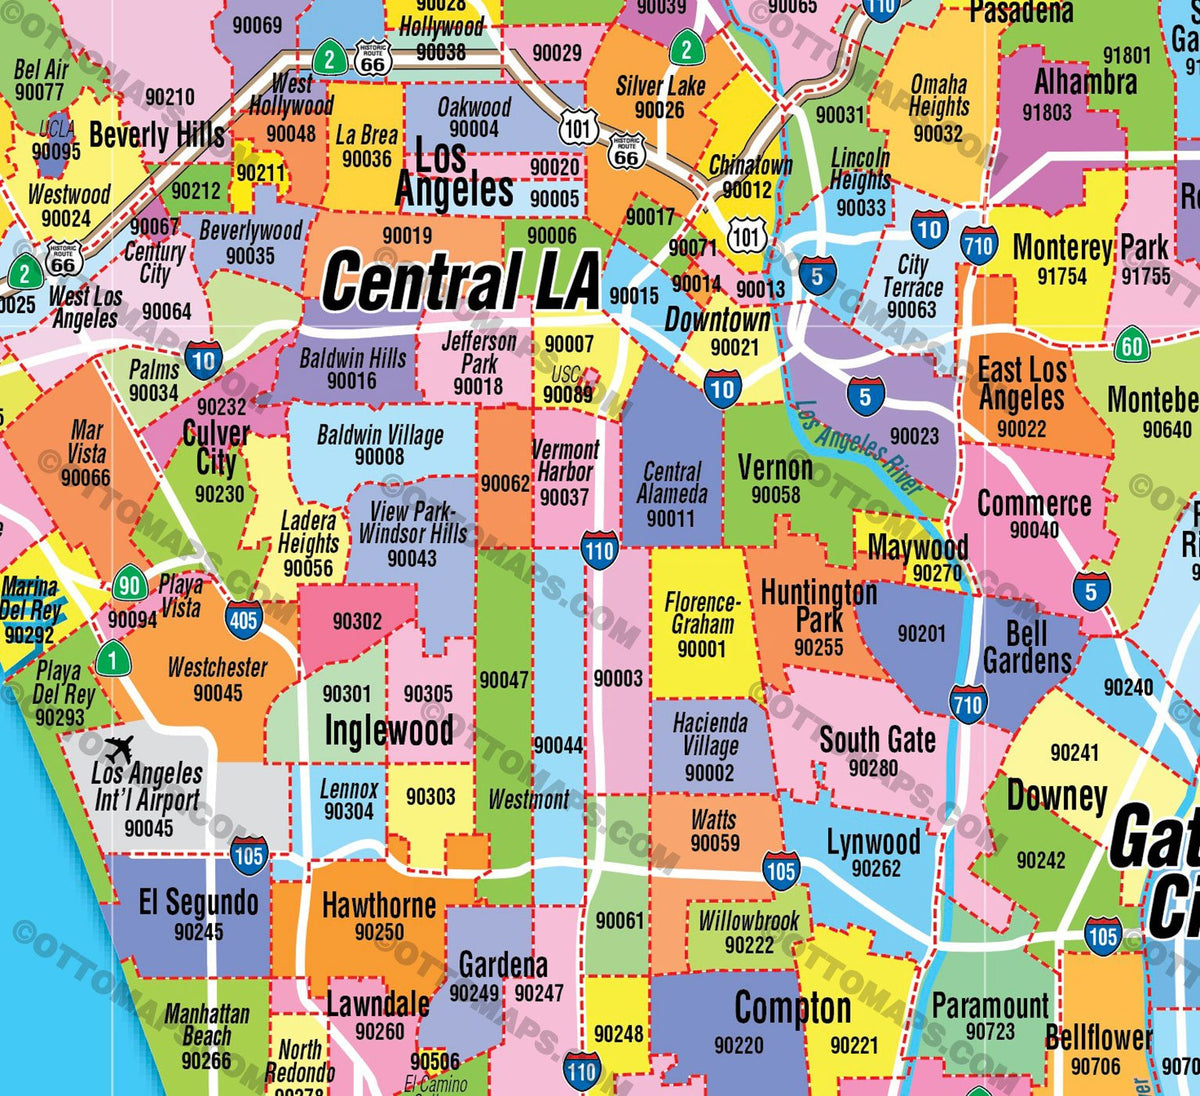 Los Angeles Zip Code Map Full Zip Codes Colorized Otto Maps 9110